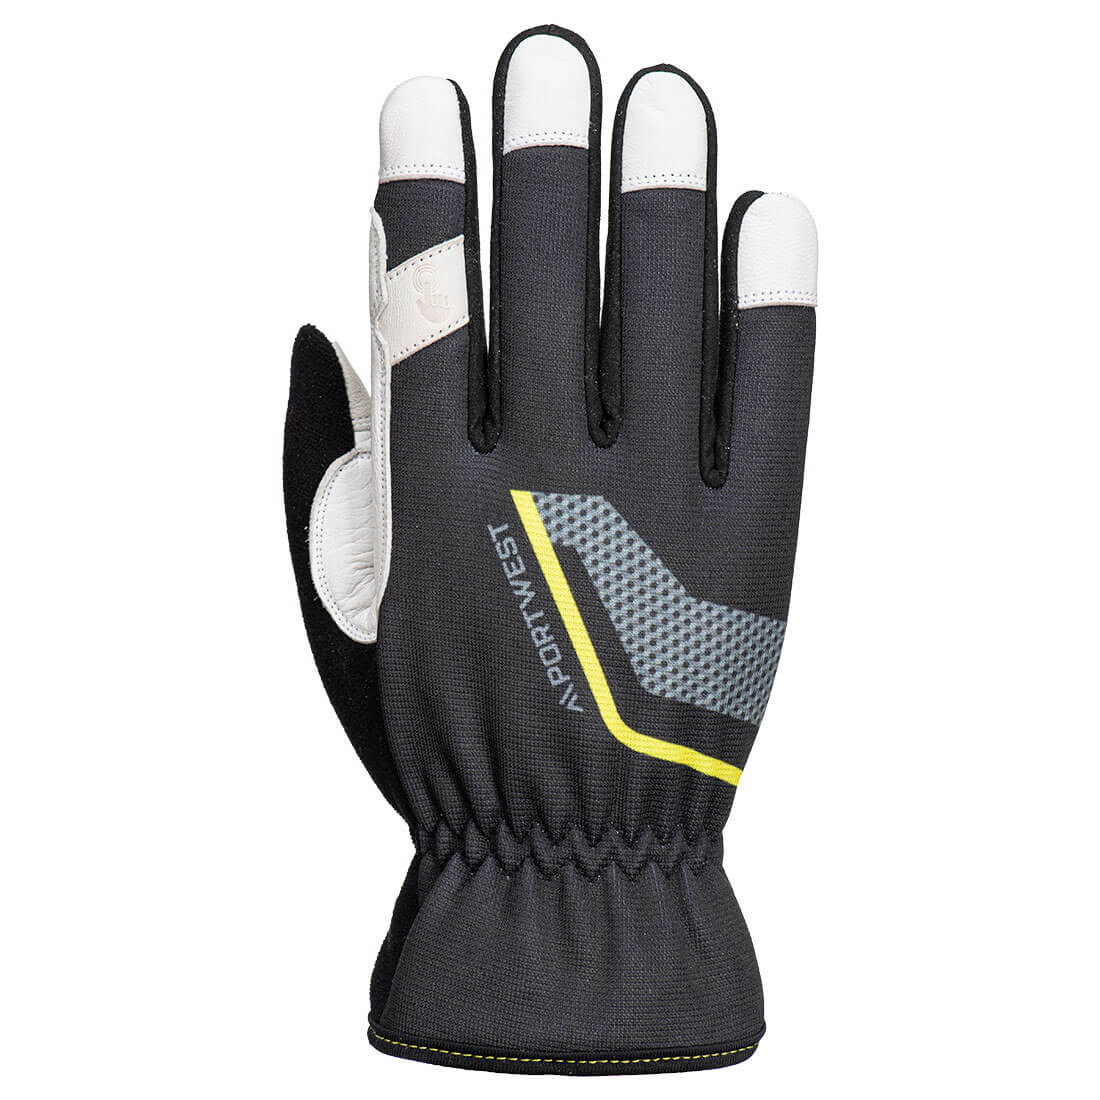 Stretch Utility Leather Glove - Personal protection